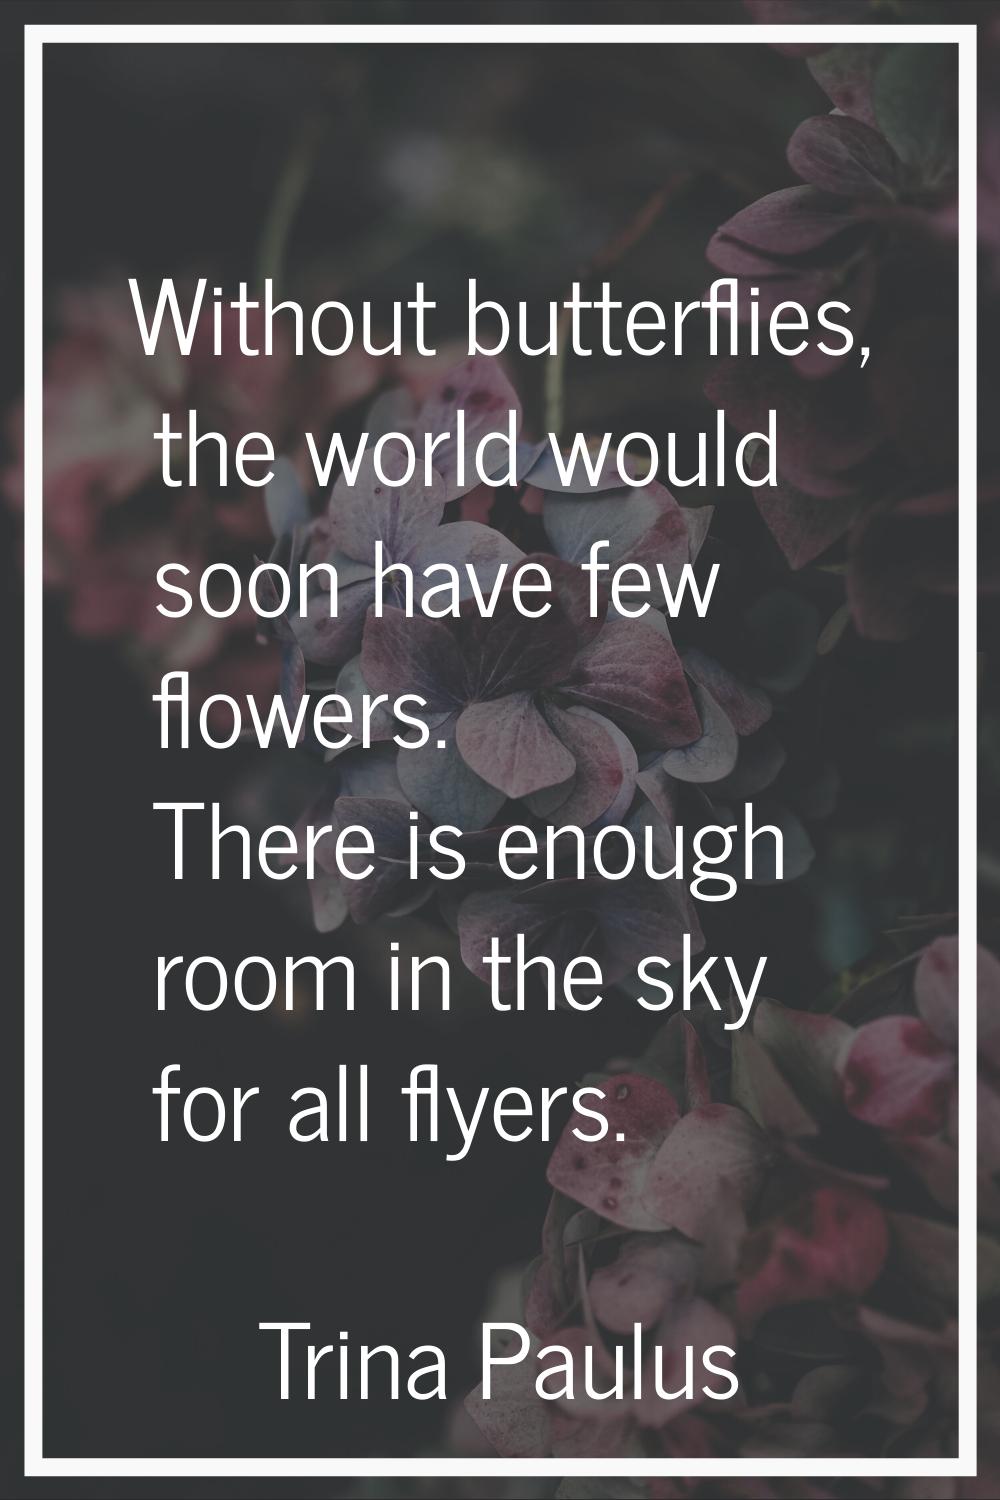 Without butterflies, the world would soon have few flowers. There is enough room in the sky for all